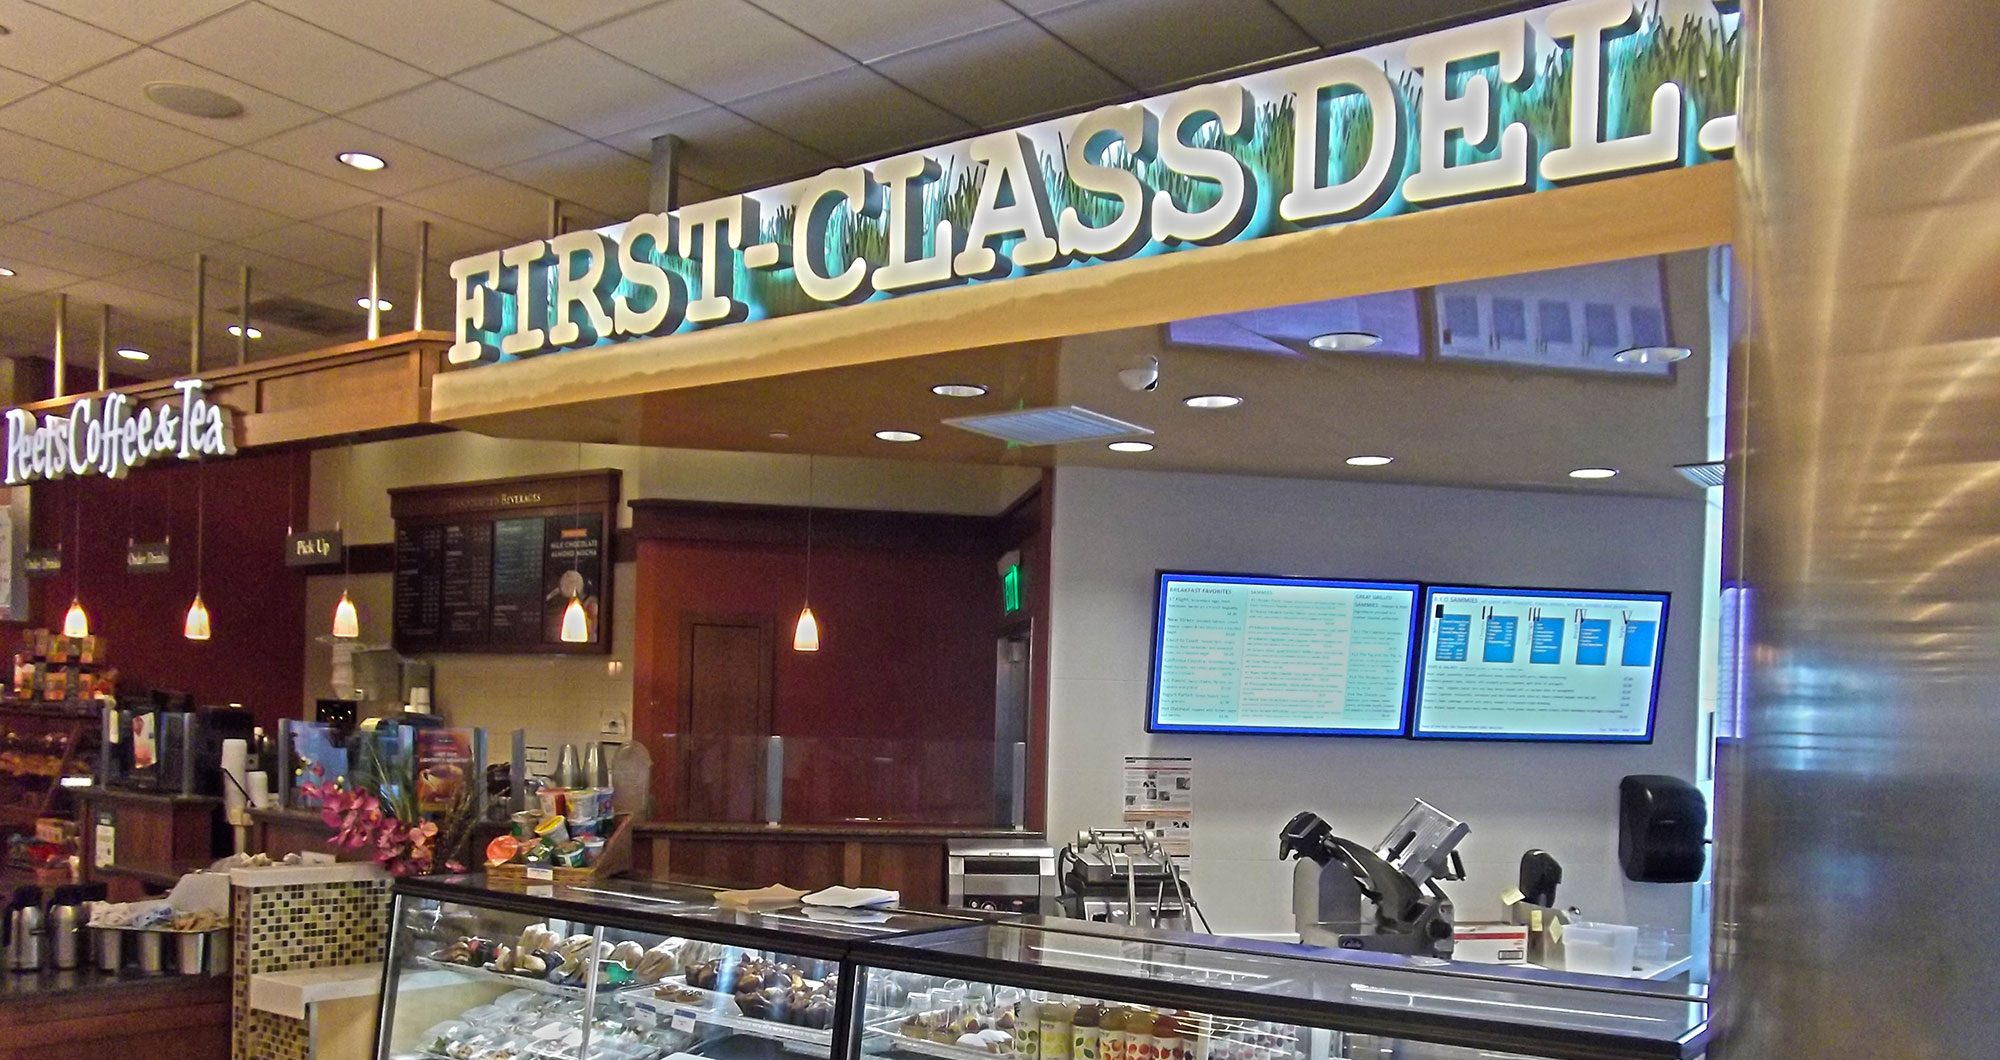 San Jose Airport New Concessions - First Class Deli